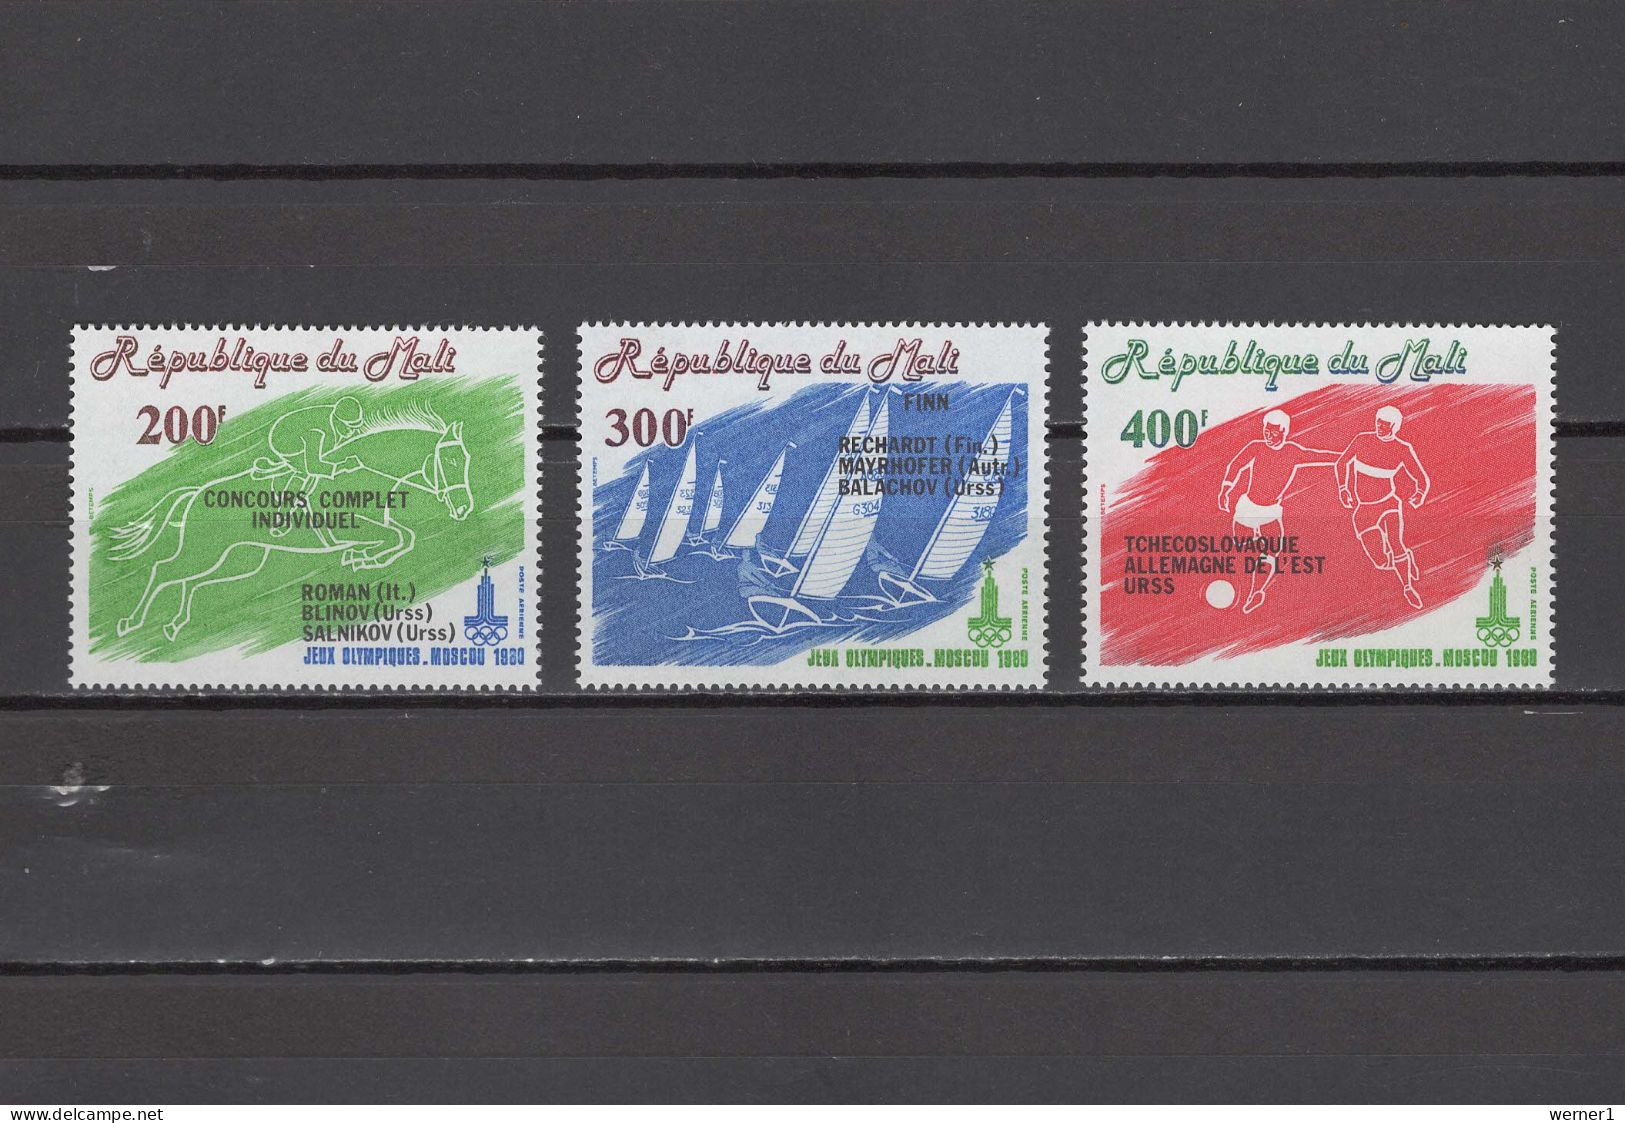 Mali 1980 Olympic Games Moscow, Equestrian, Sailing, Football Soccer Set Of 3 With Winners Overprint MNH - Summer 1980: Moscow